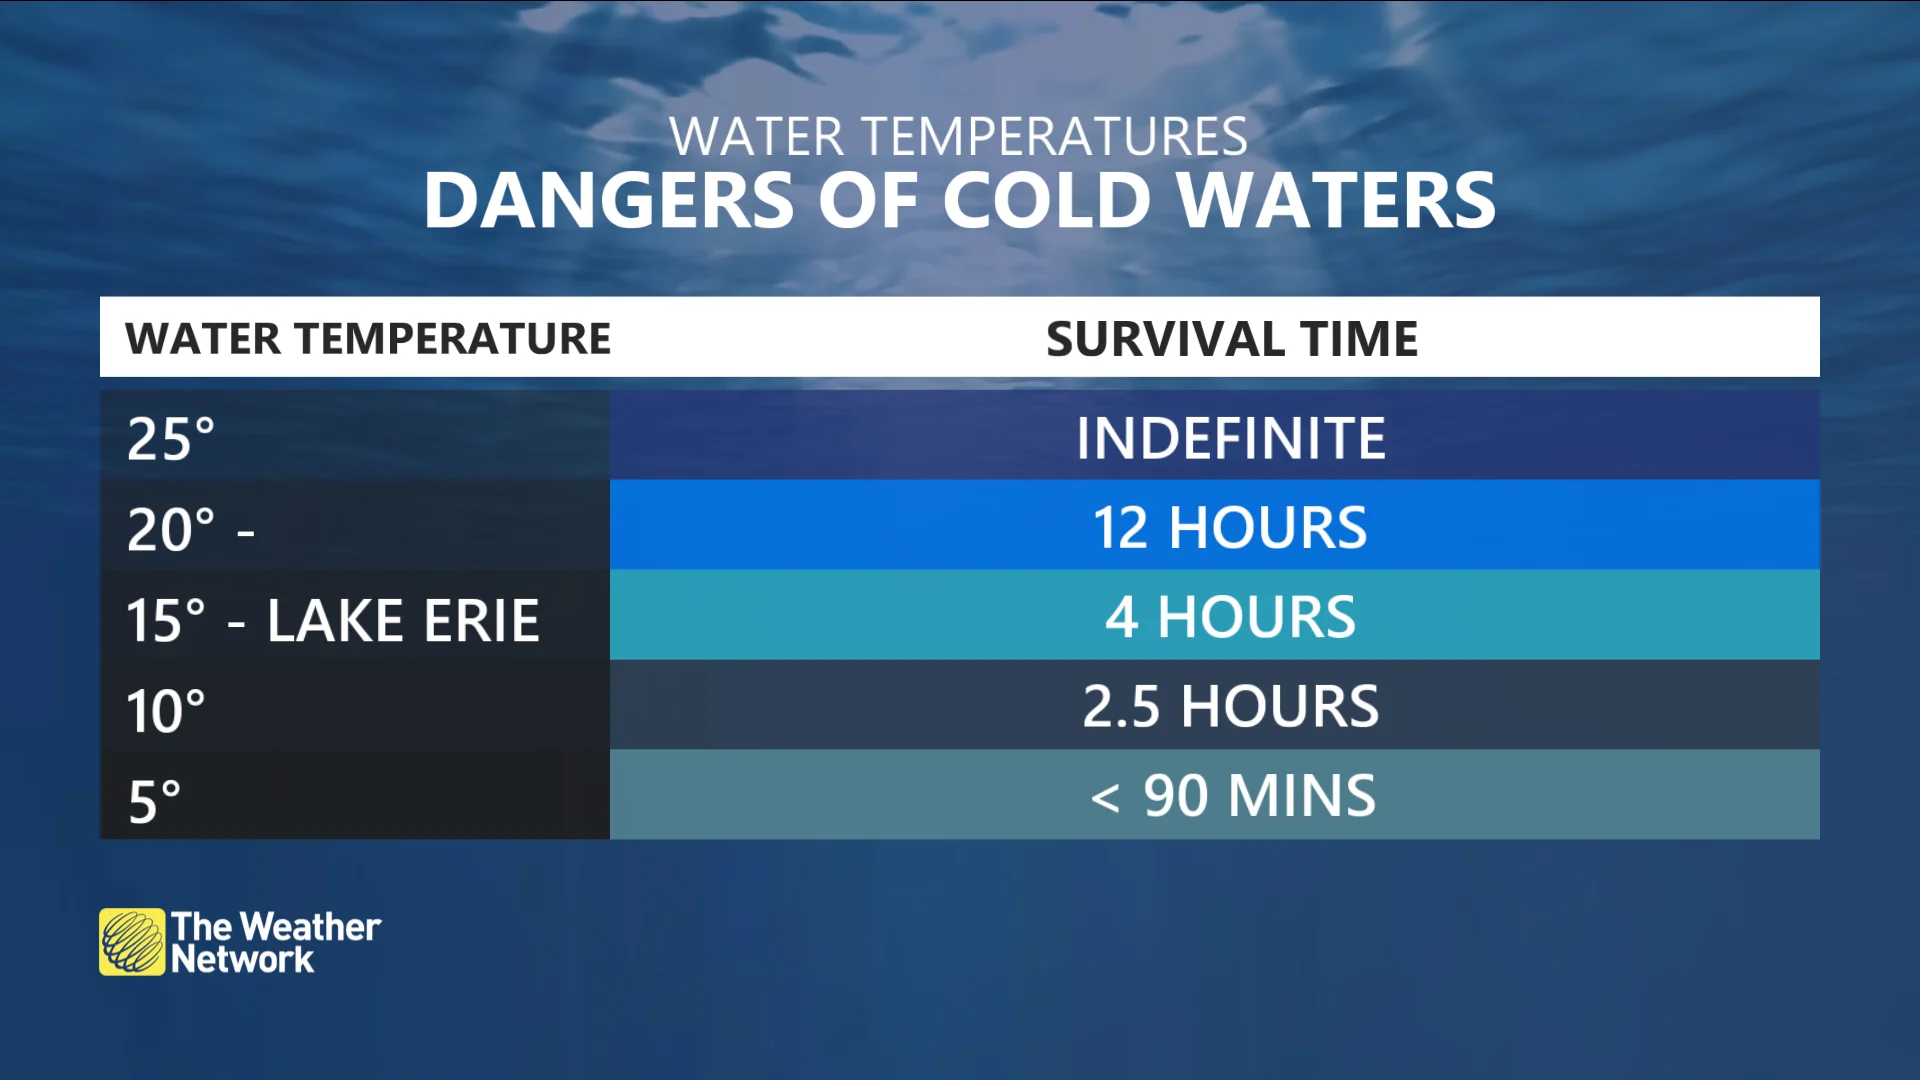 Dangers of cold waters/water temperatures graphic